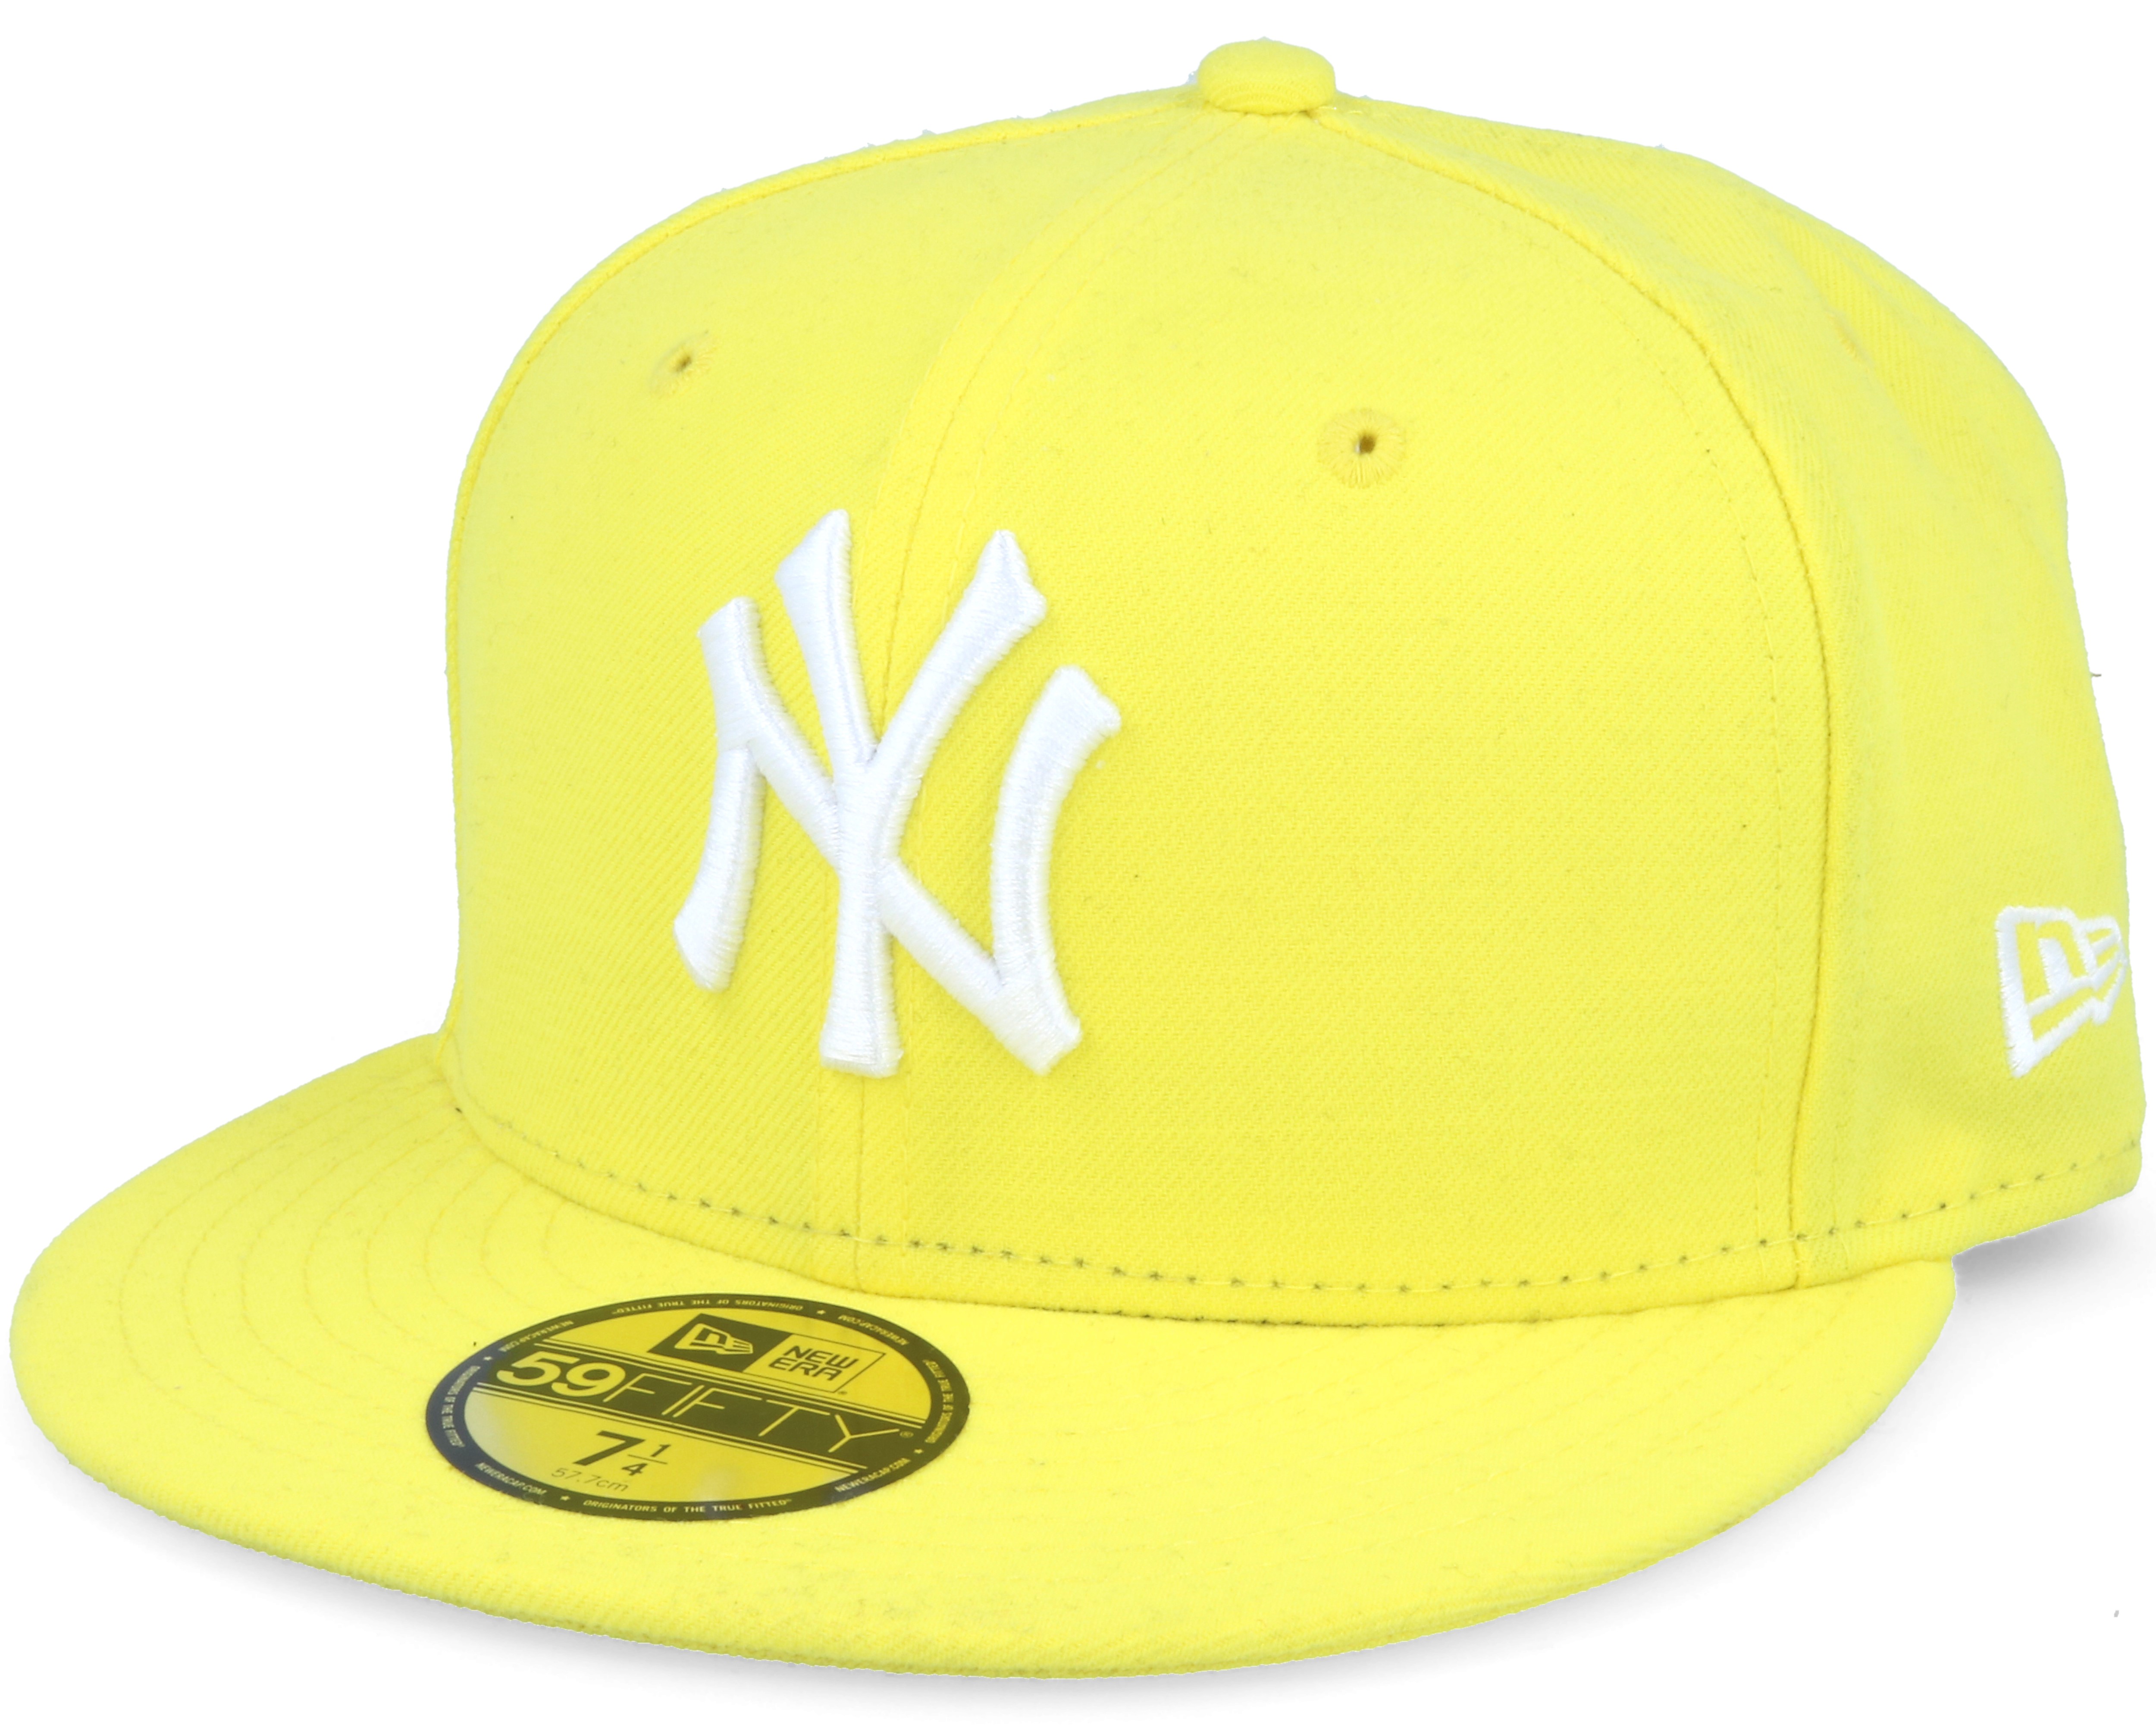 NY Yankees MLB Basic Yellow 59fifty Fitted - New Era caps - Hatstore.dk